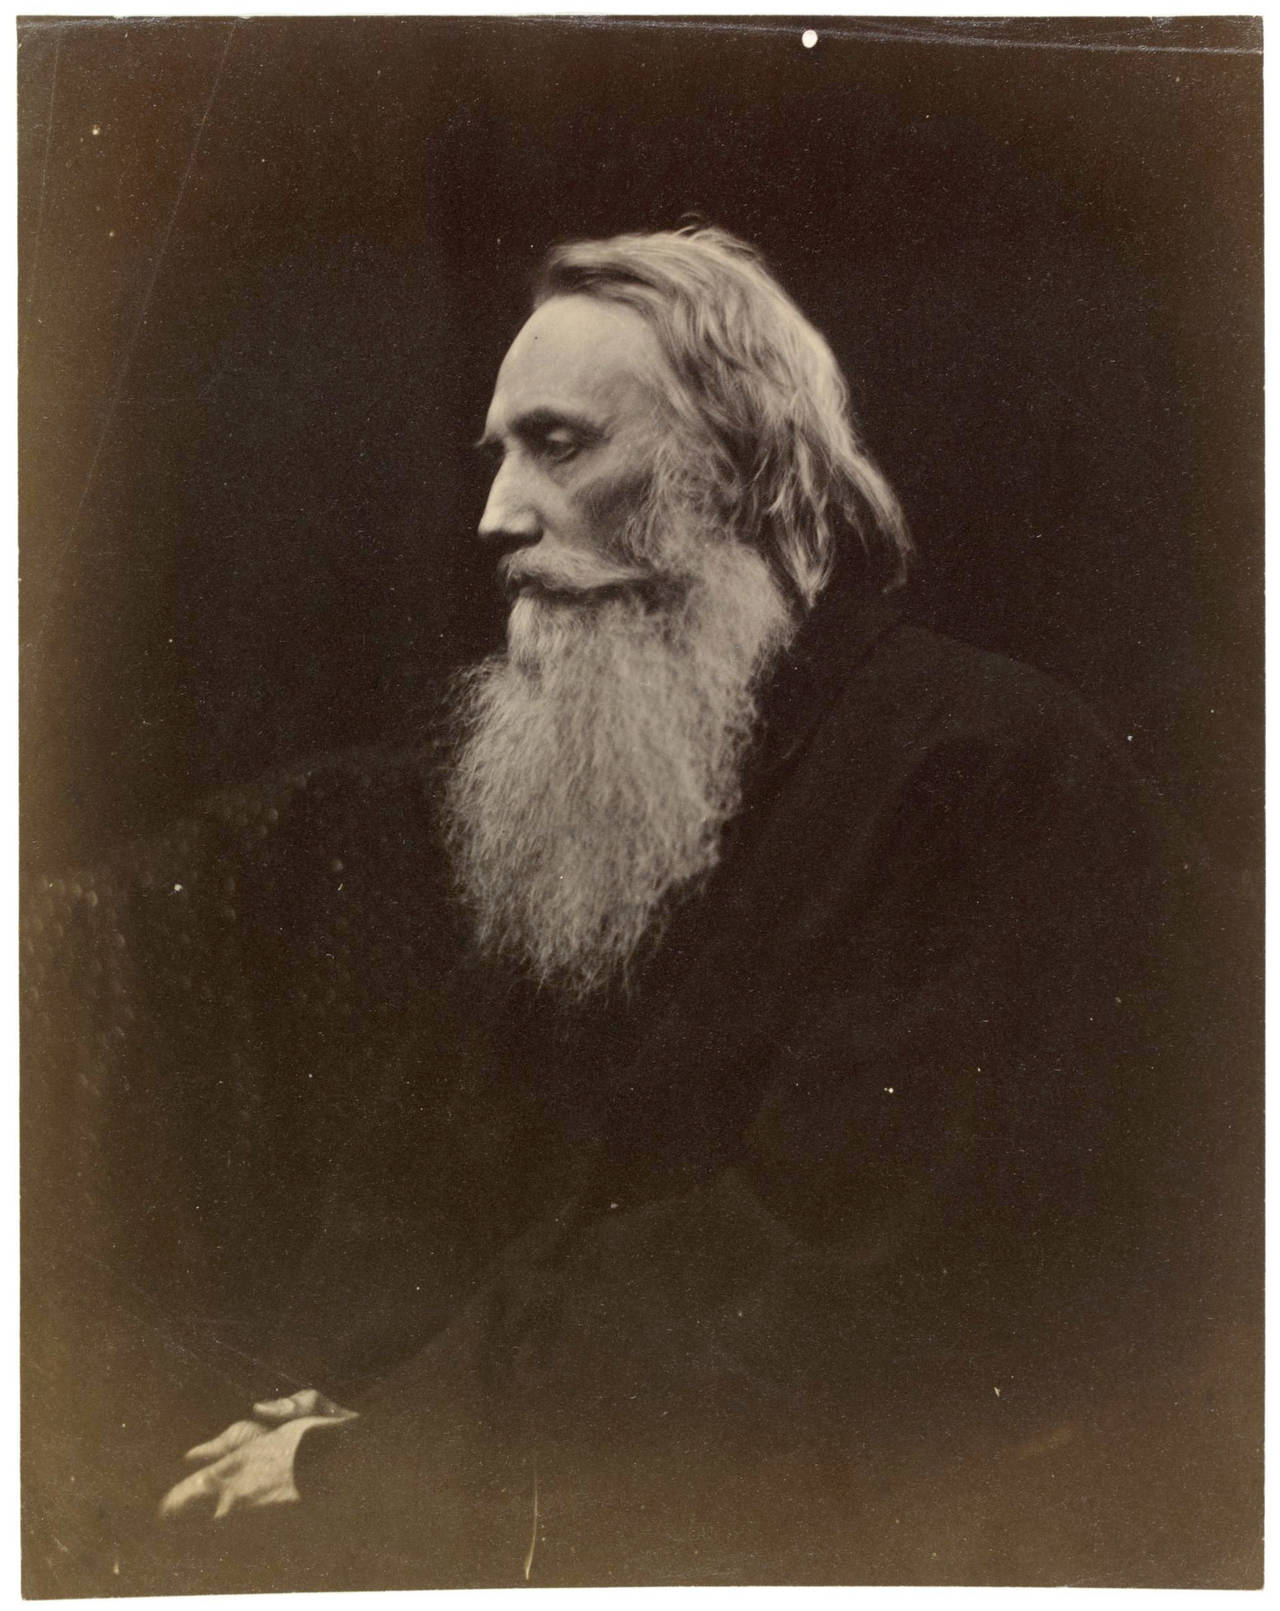 Henry Taylor, photograph, by Julia Margaret Cameron, 1864, England. Museum no. 211-1969. © Victoria and Albert Museum, London